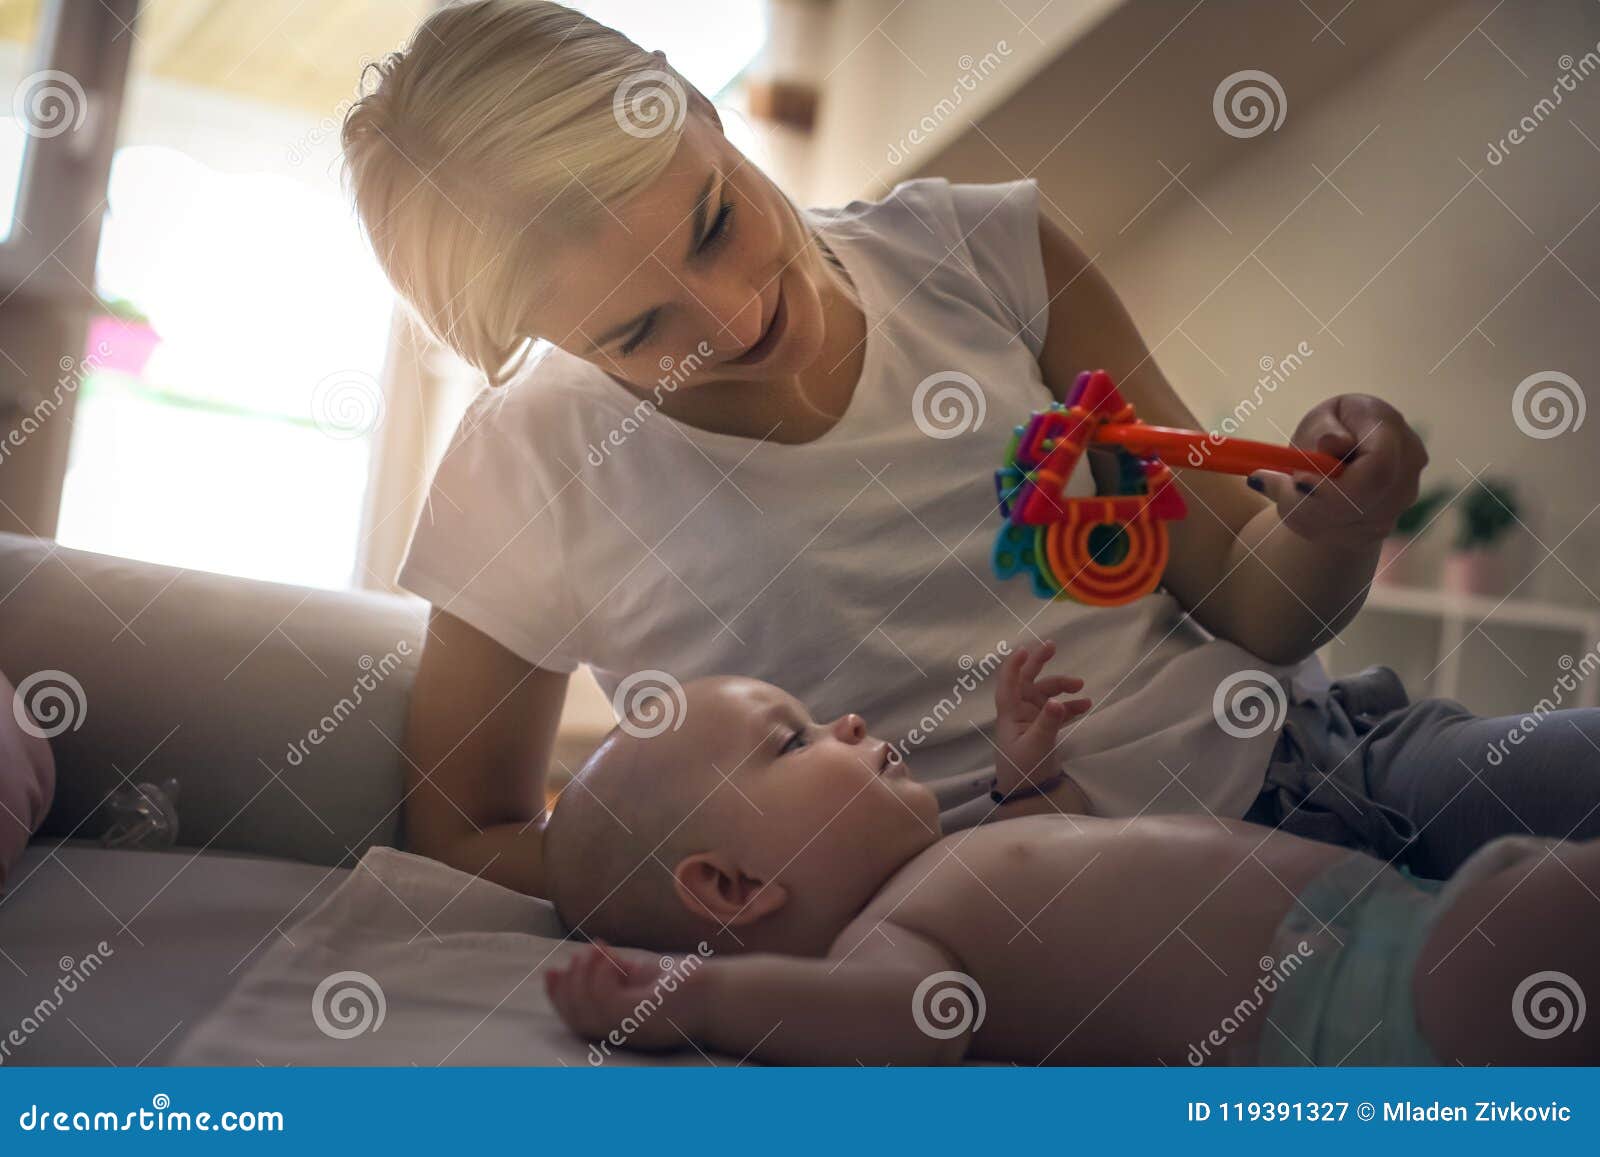 mother plying with her little baby boy at home and holdi